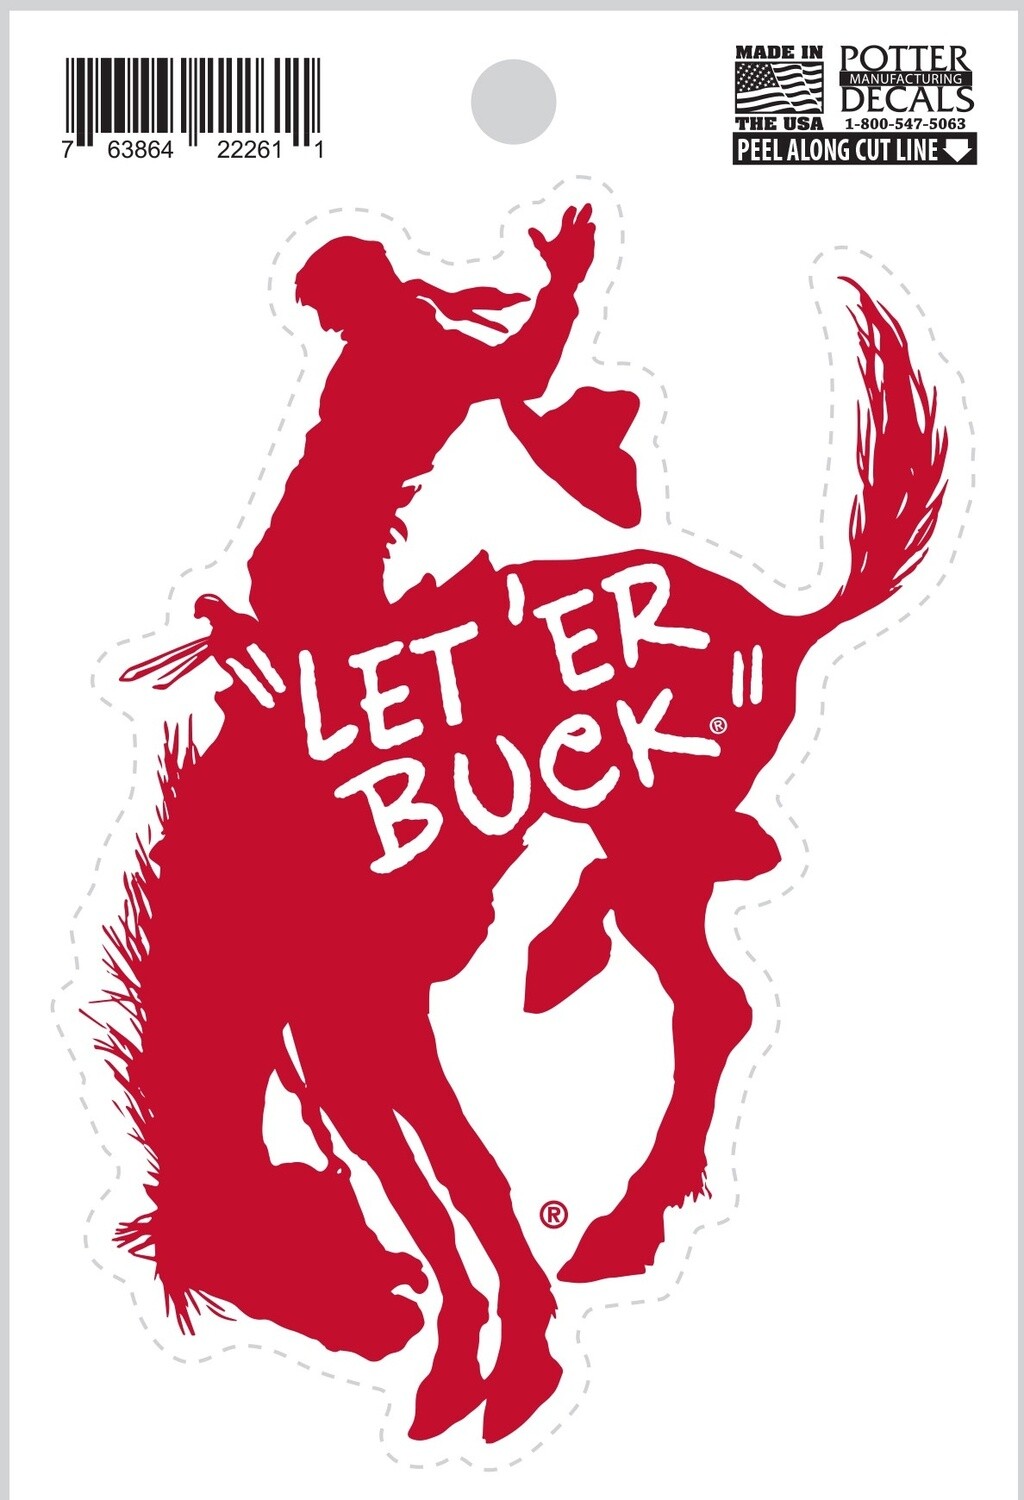 Pendleton Round-Up Bucking Horse Silhouette Decal